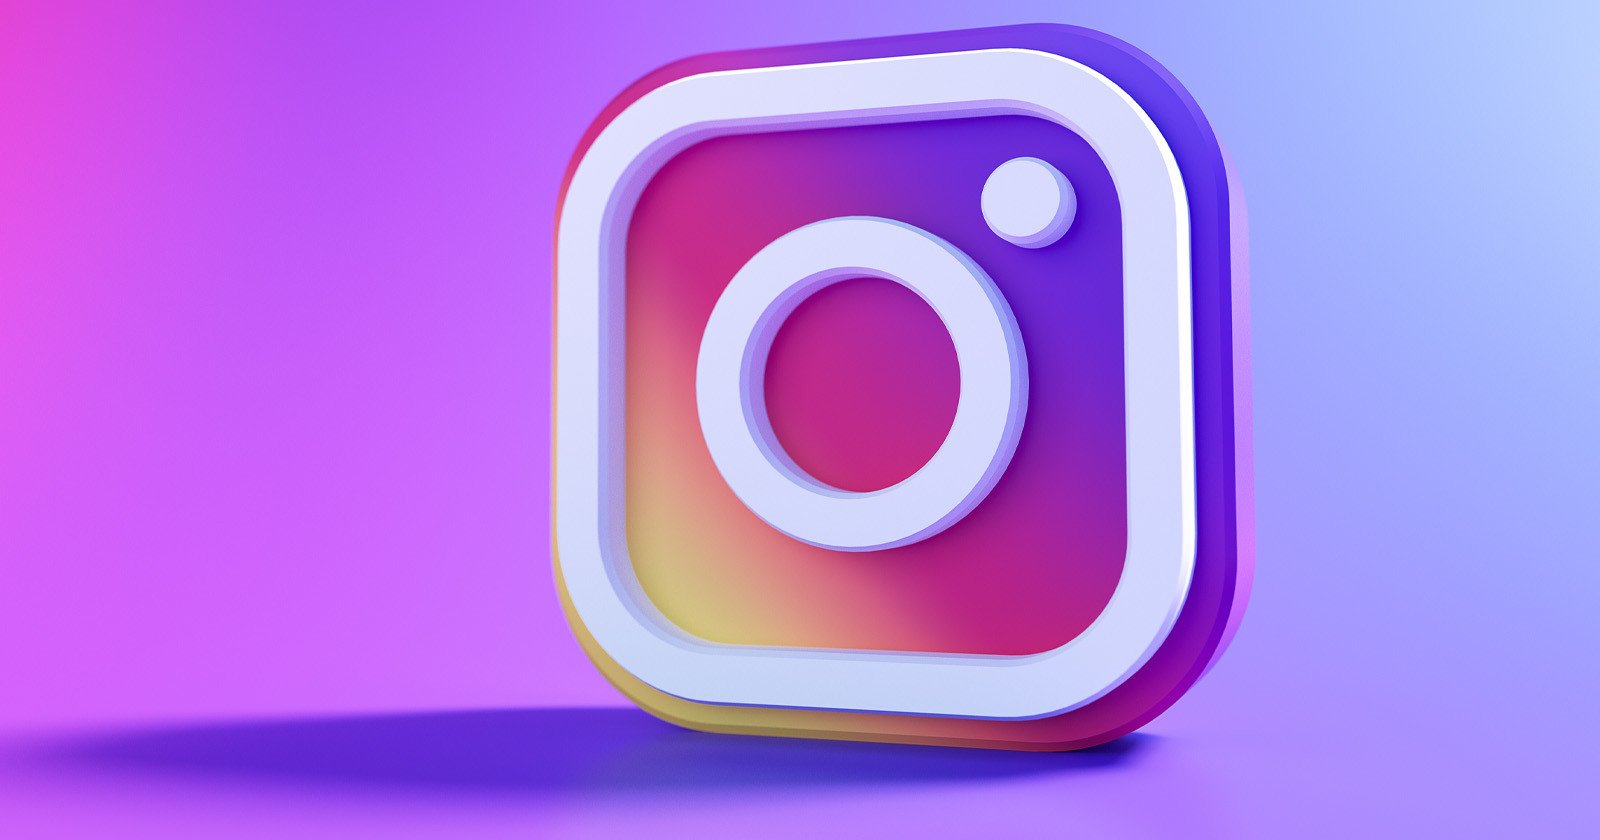  instagram will test repost feature 